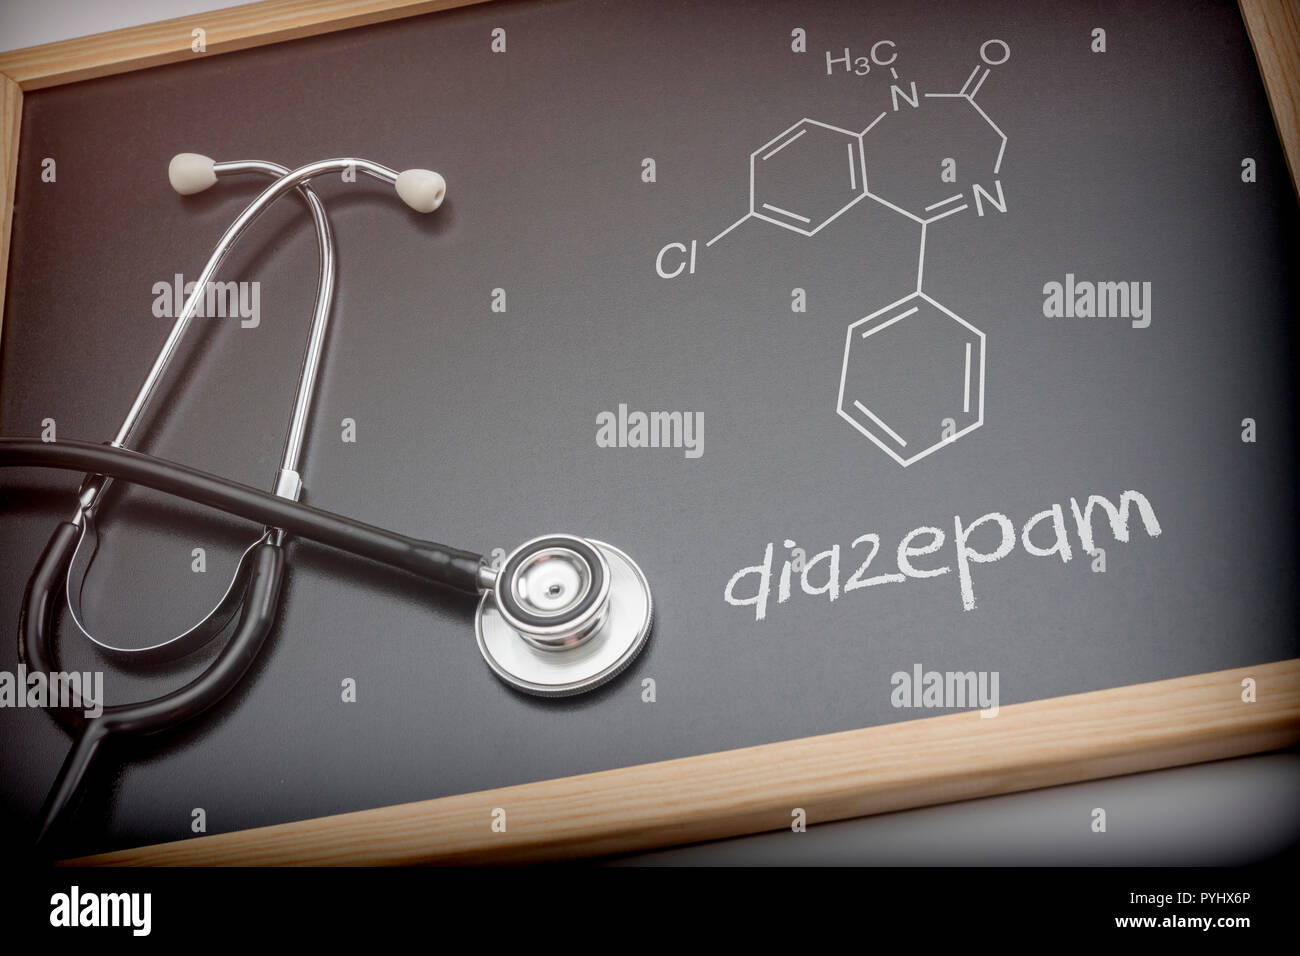 Chemical formula of diazepam written with chalk on a blackboard next to a stethoscope, conceptual image Stock Photo